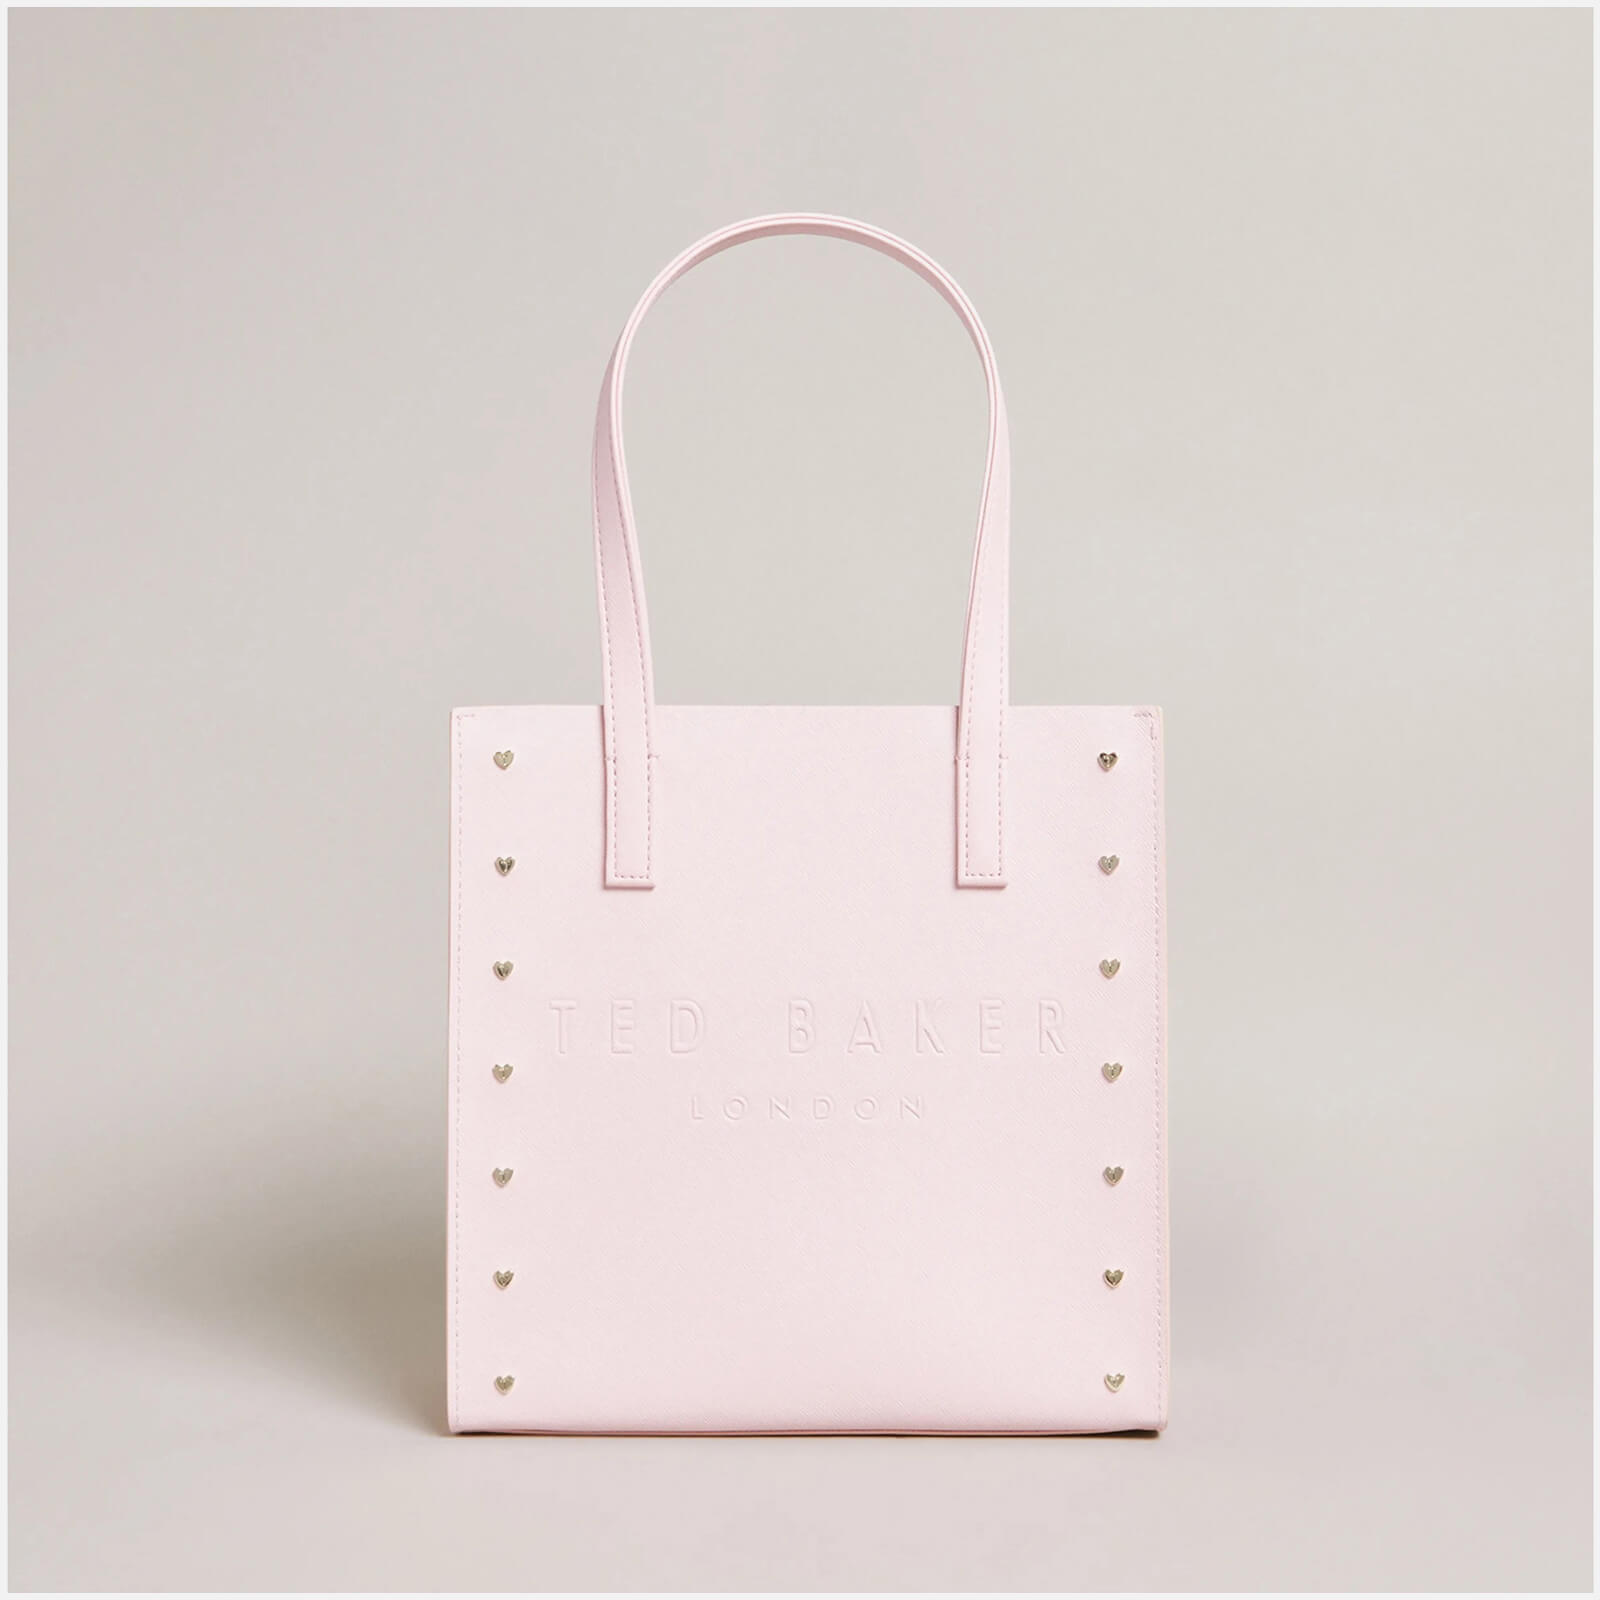 Ted Baker Women's Stocon Heart Studded Small Tote Bag - Pale Pink